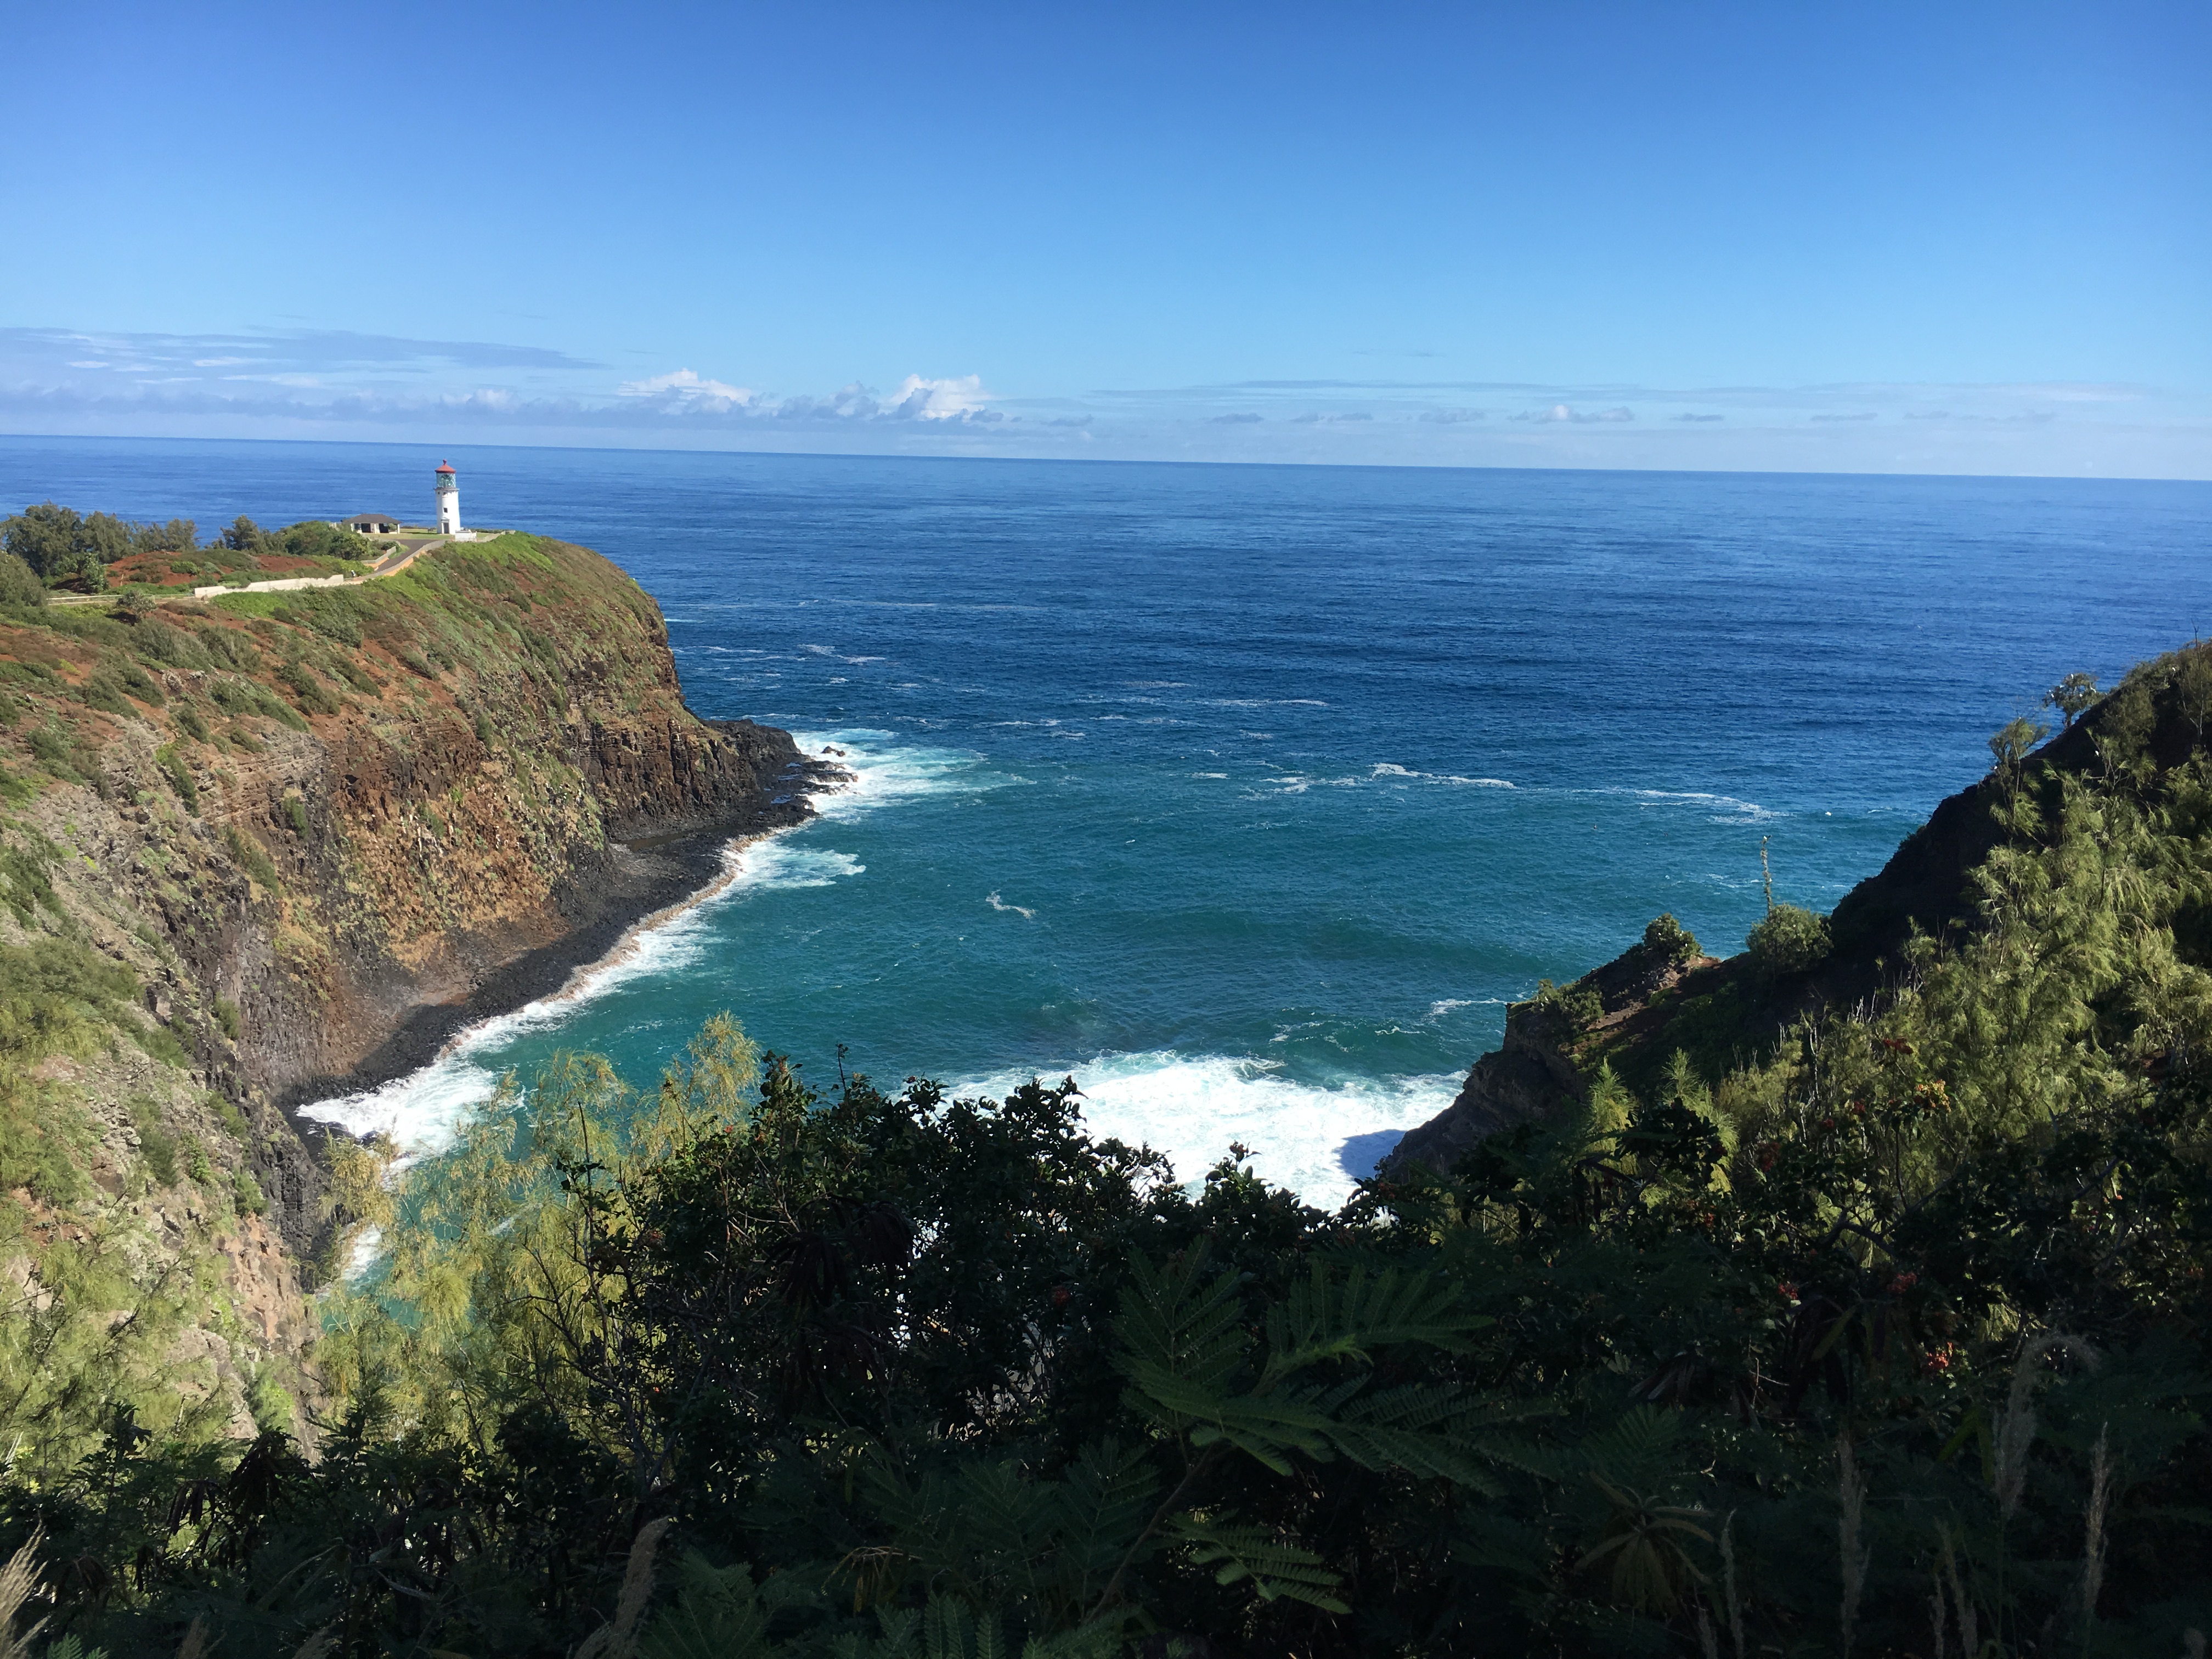 Kiluea Point National Wildlife Refuge lighthouse sits on a point. The photo shows a narrow inlet where the blue waters of the Pacific meet the high cliff faces of the refuge. Blue sky gleams in the back with contrast against the bright green of the forest. 